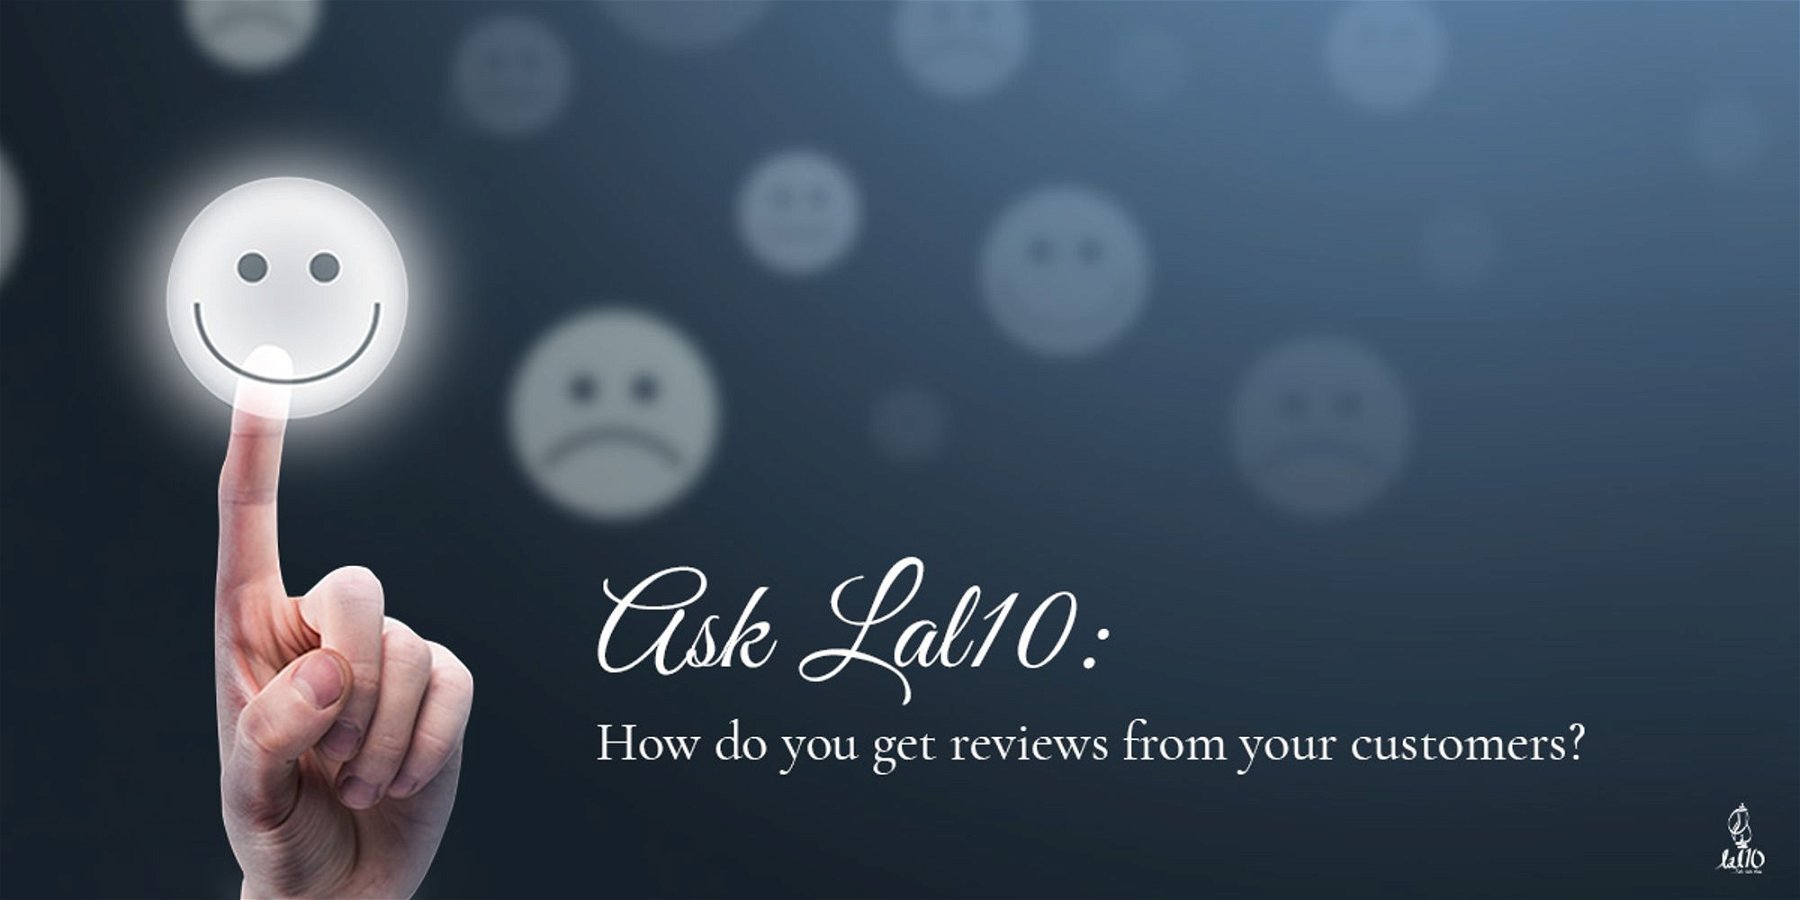 Ask Lal10: How do you get reviews from your customers?